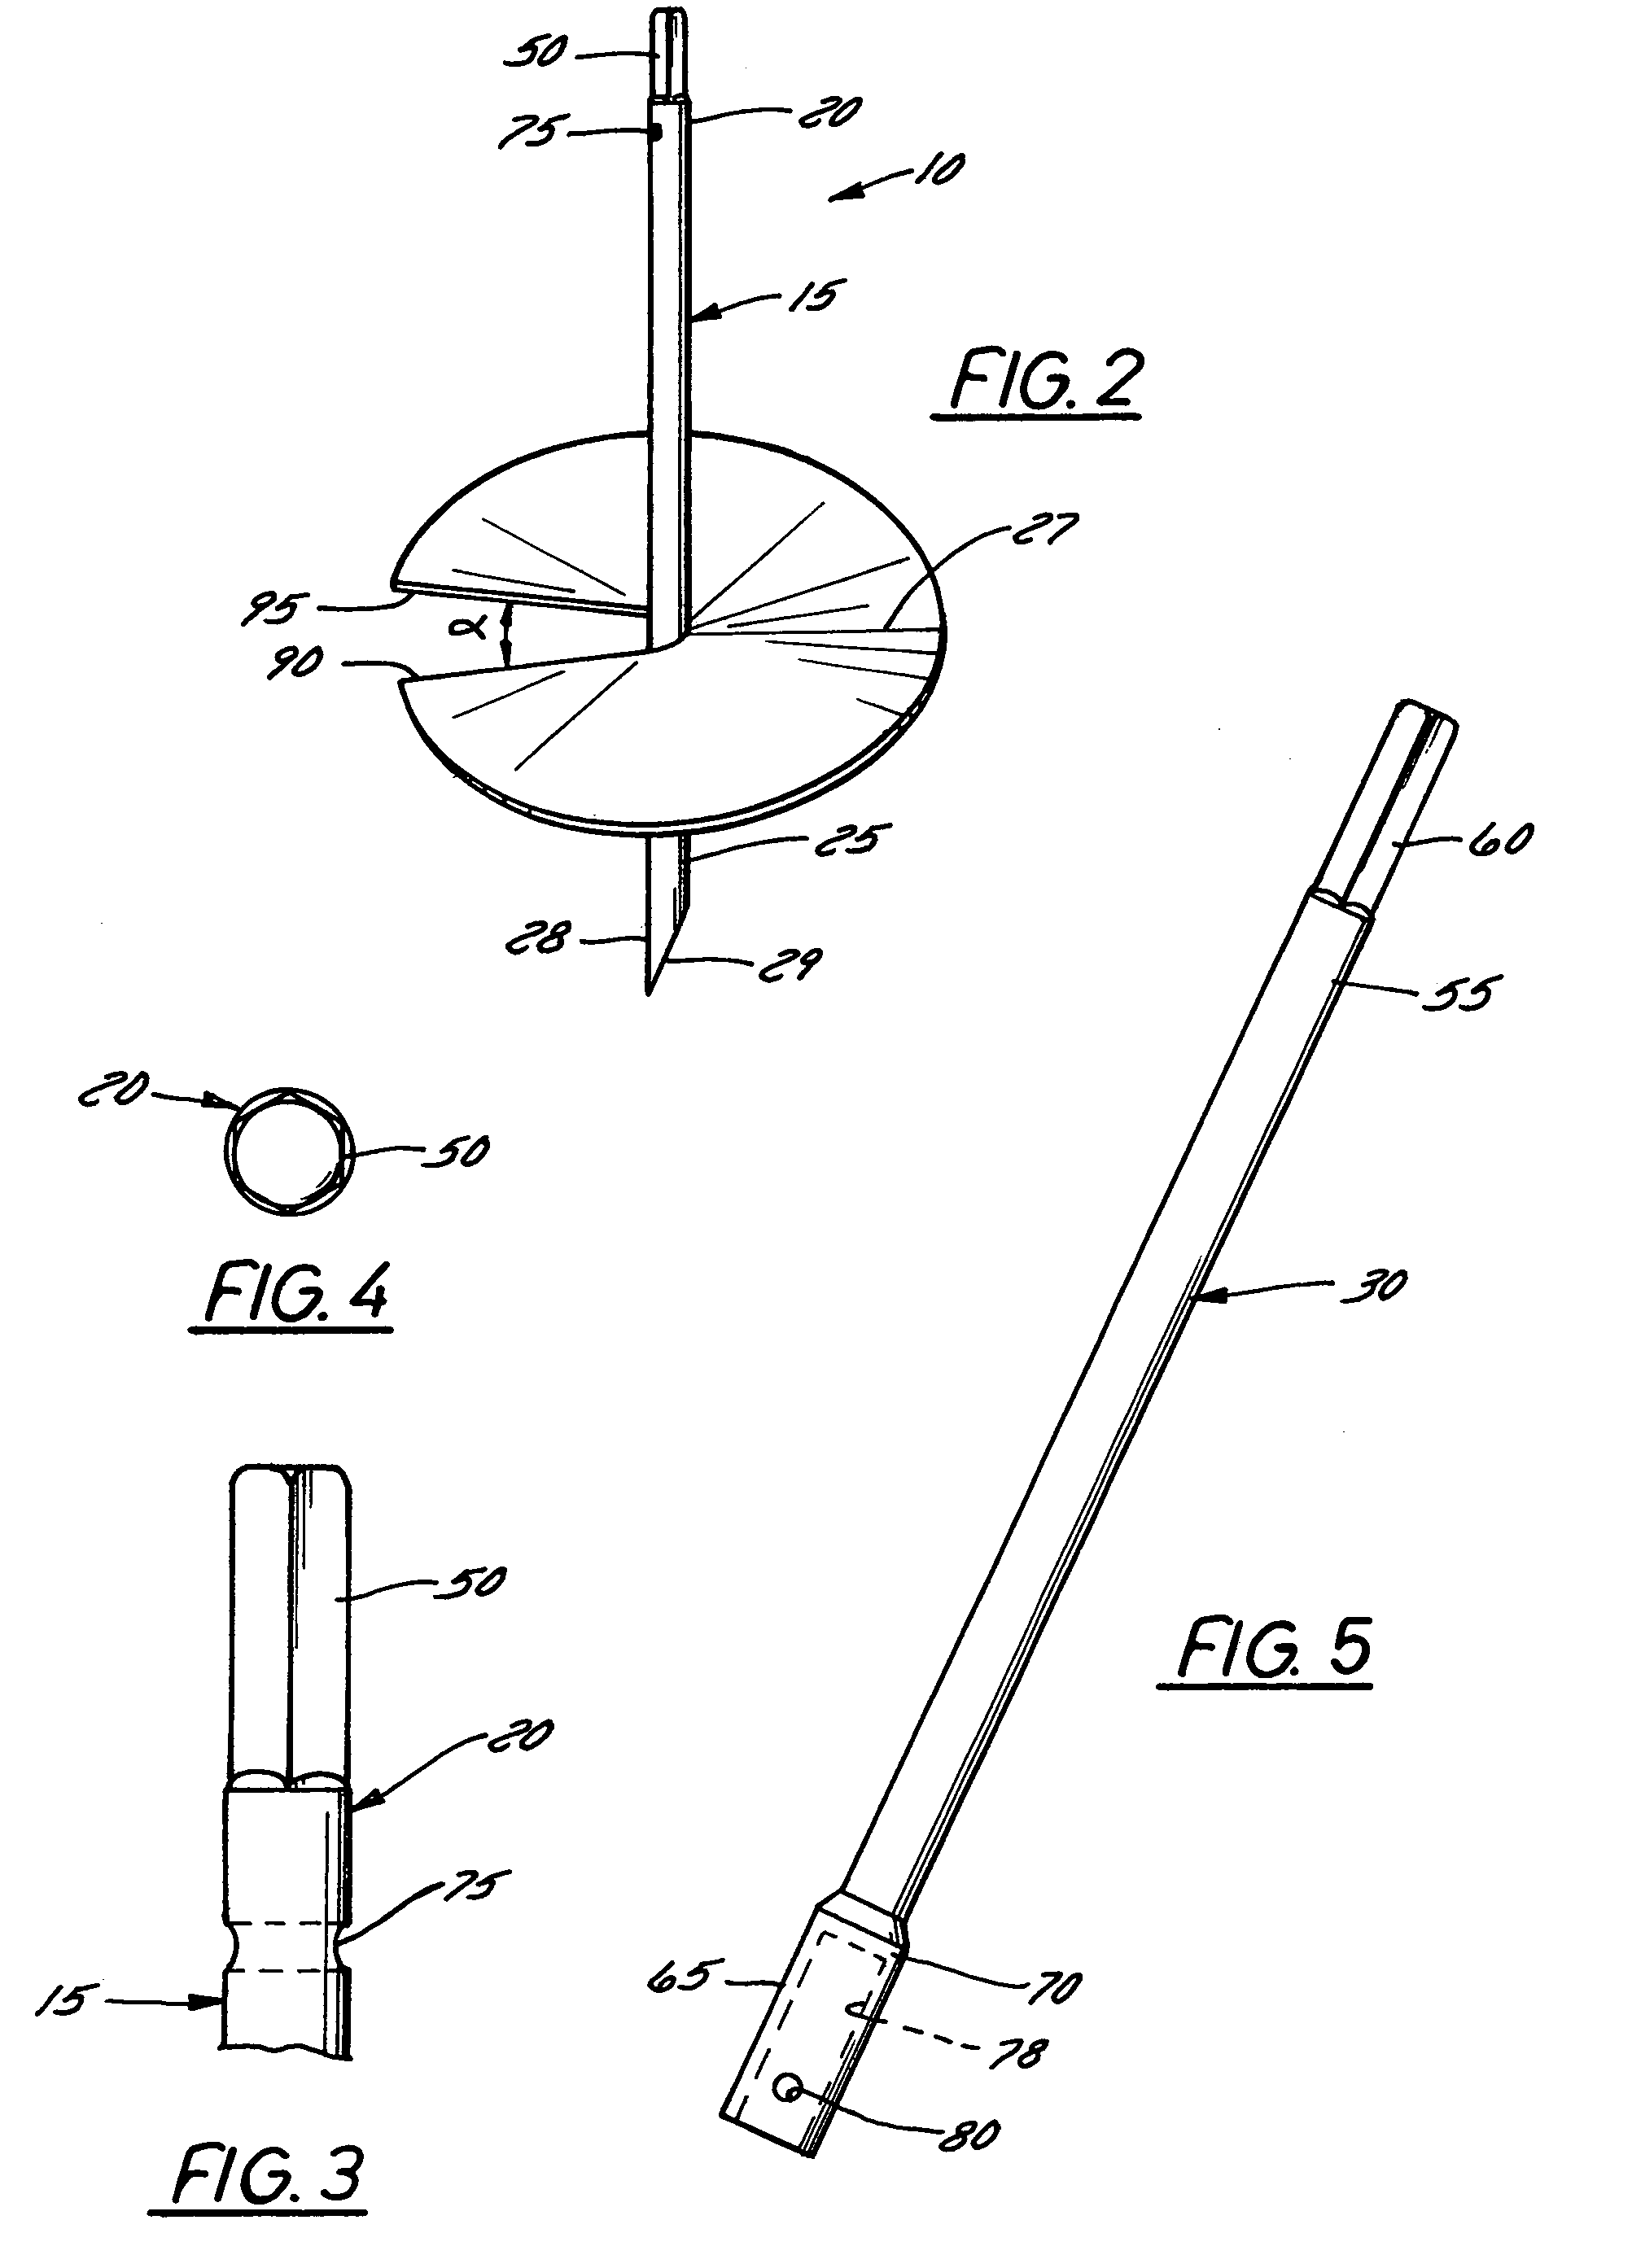 Auger for mixing and burrowing